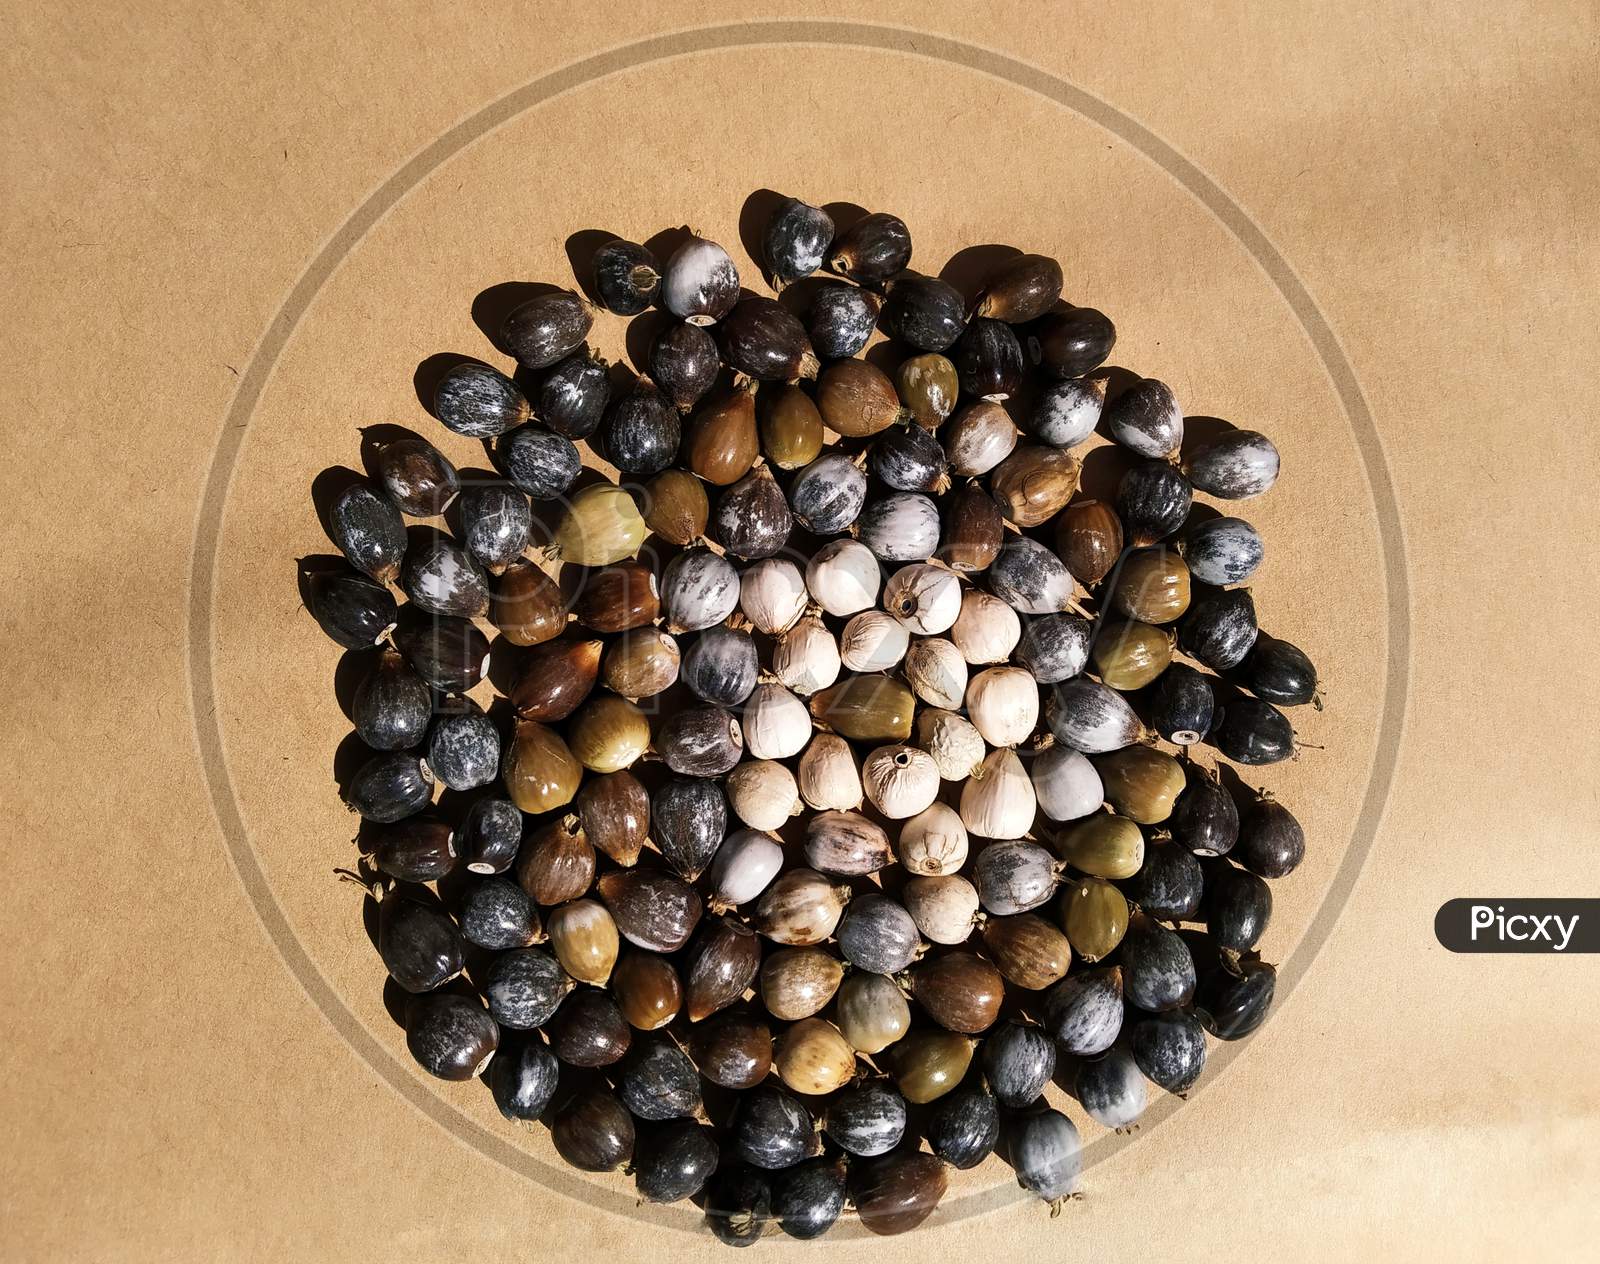 Photo Of Seeds Of Job'S Tears, Scientific Name Coix Lacryma-Jobi, Also Known As Adlay Or Adlay Millet, Is Tall Grain-Bearing Perennial Tropical Plant